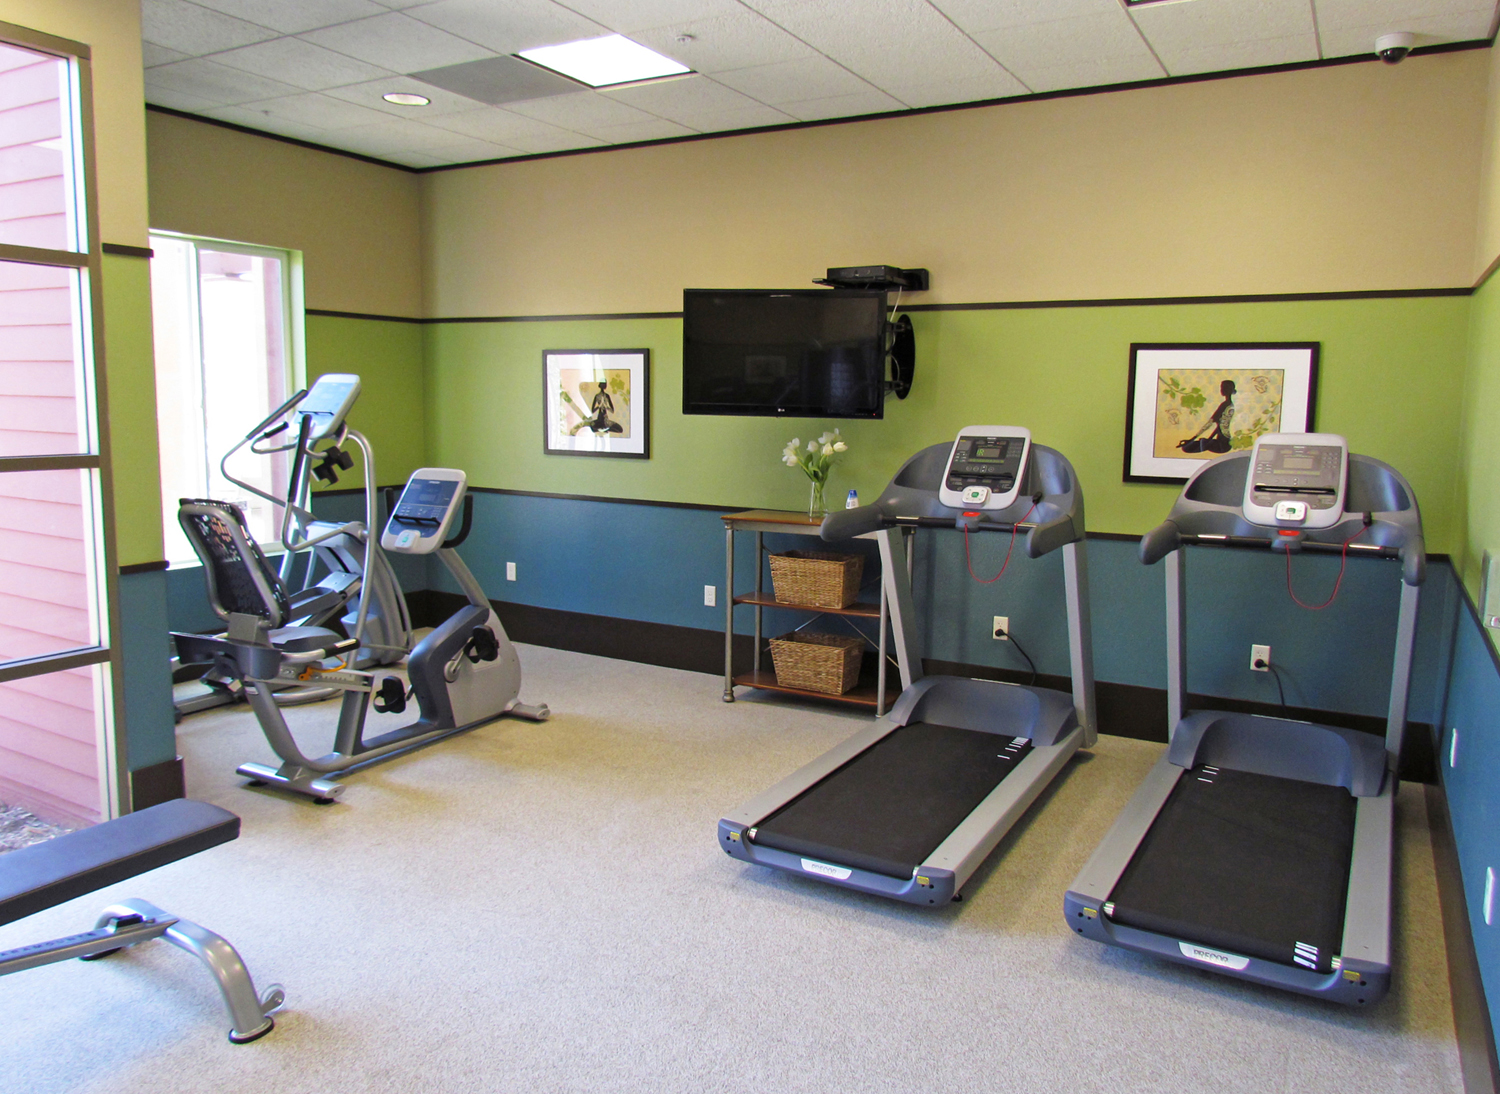 Interior view of a fitness room at Osborne Street Apartments. three different machines with a television attached to the wall